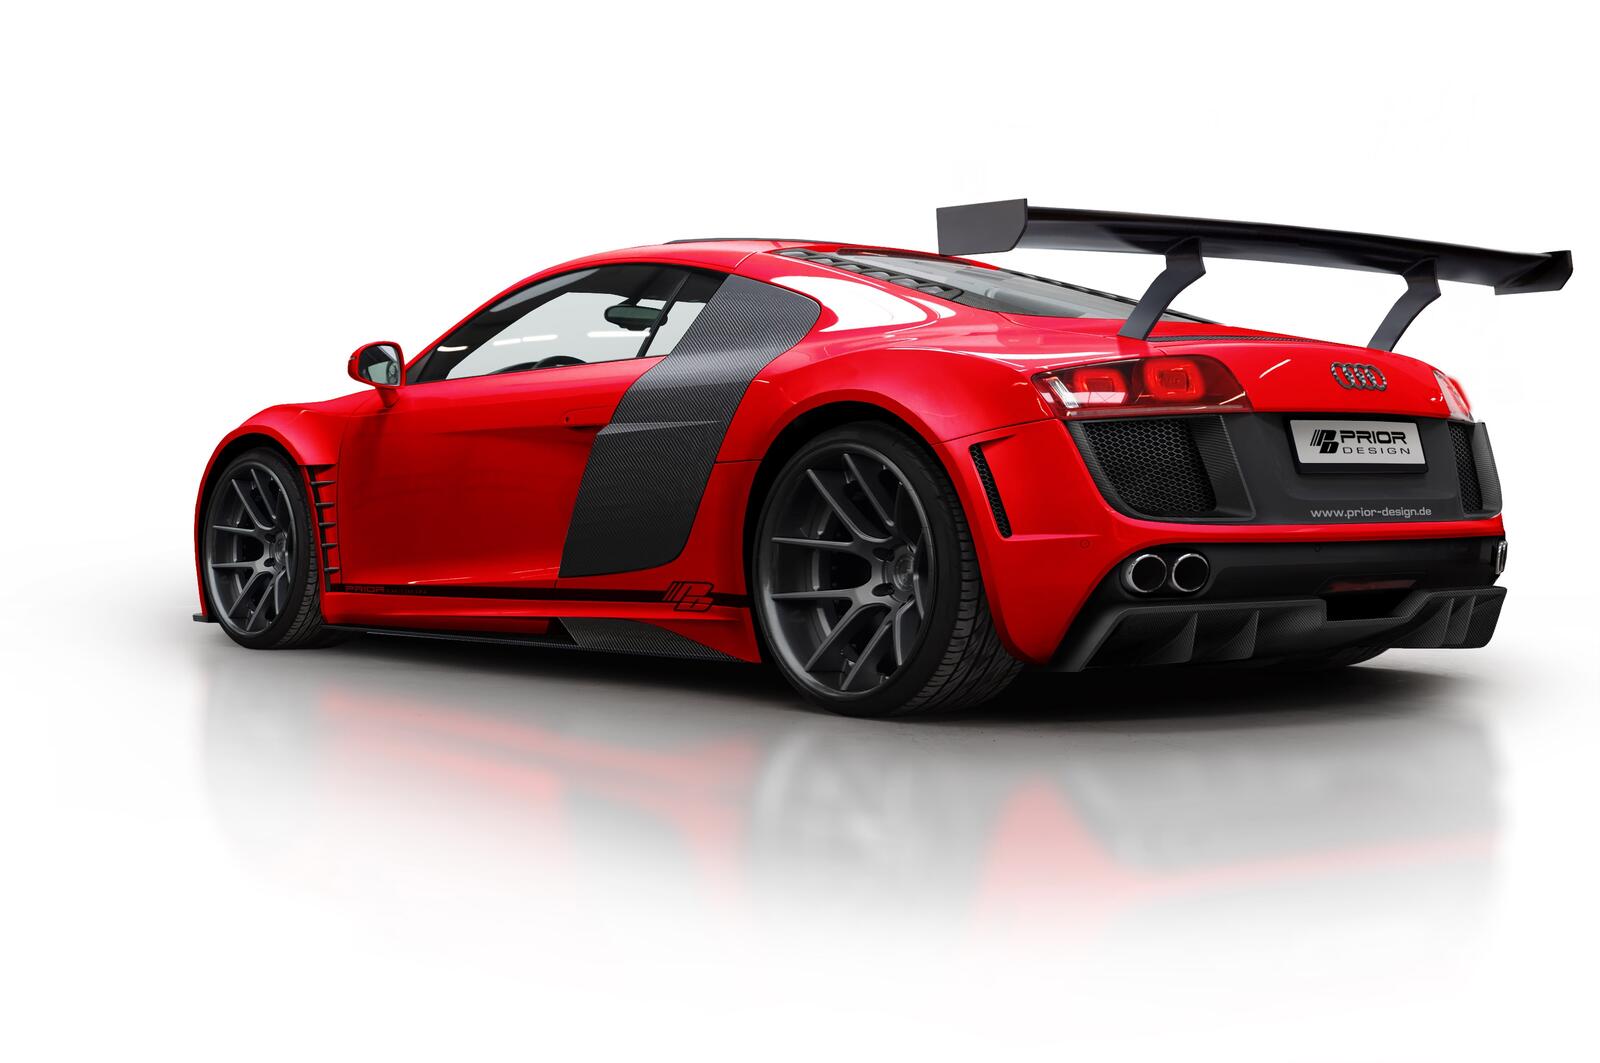 Free photo Audi R8 in red on cool rims